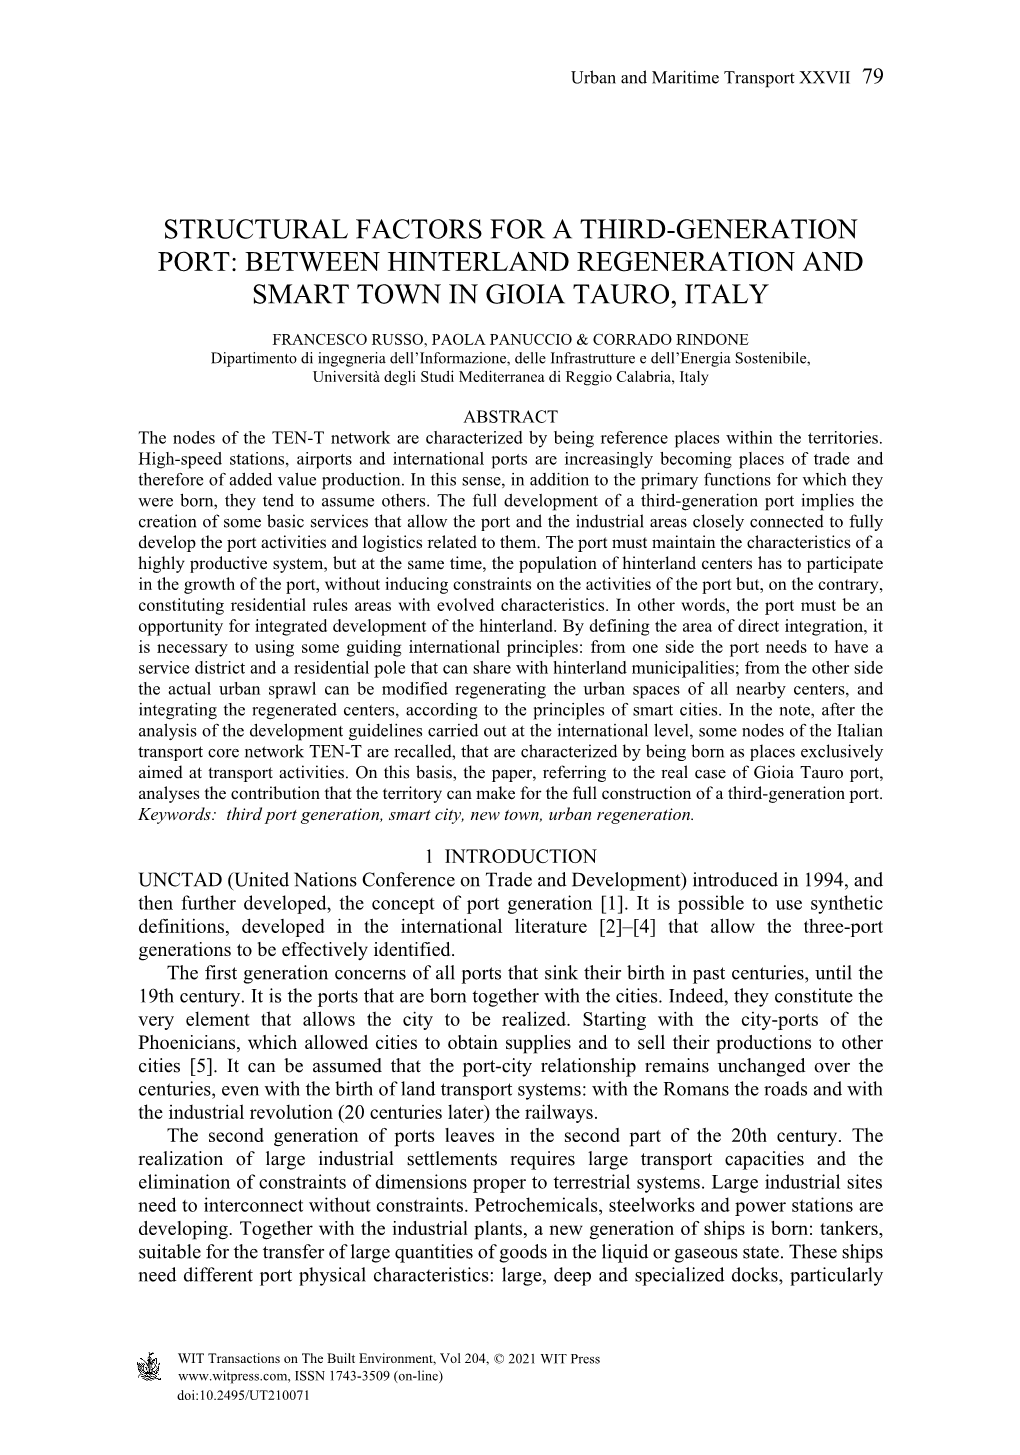 Structural Factors for a Third-Generation Port: Between Hinterland Regeneration and Smart Town in Gioia Tauro, Italy